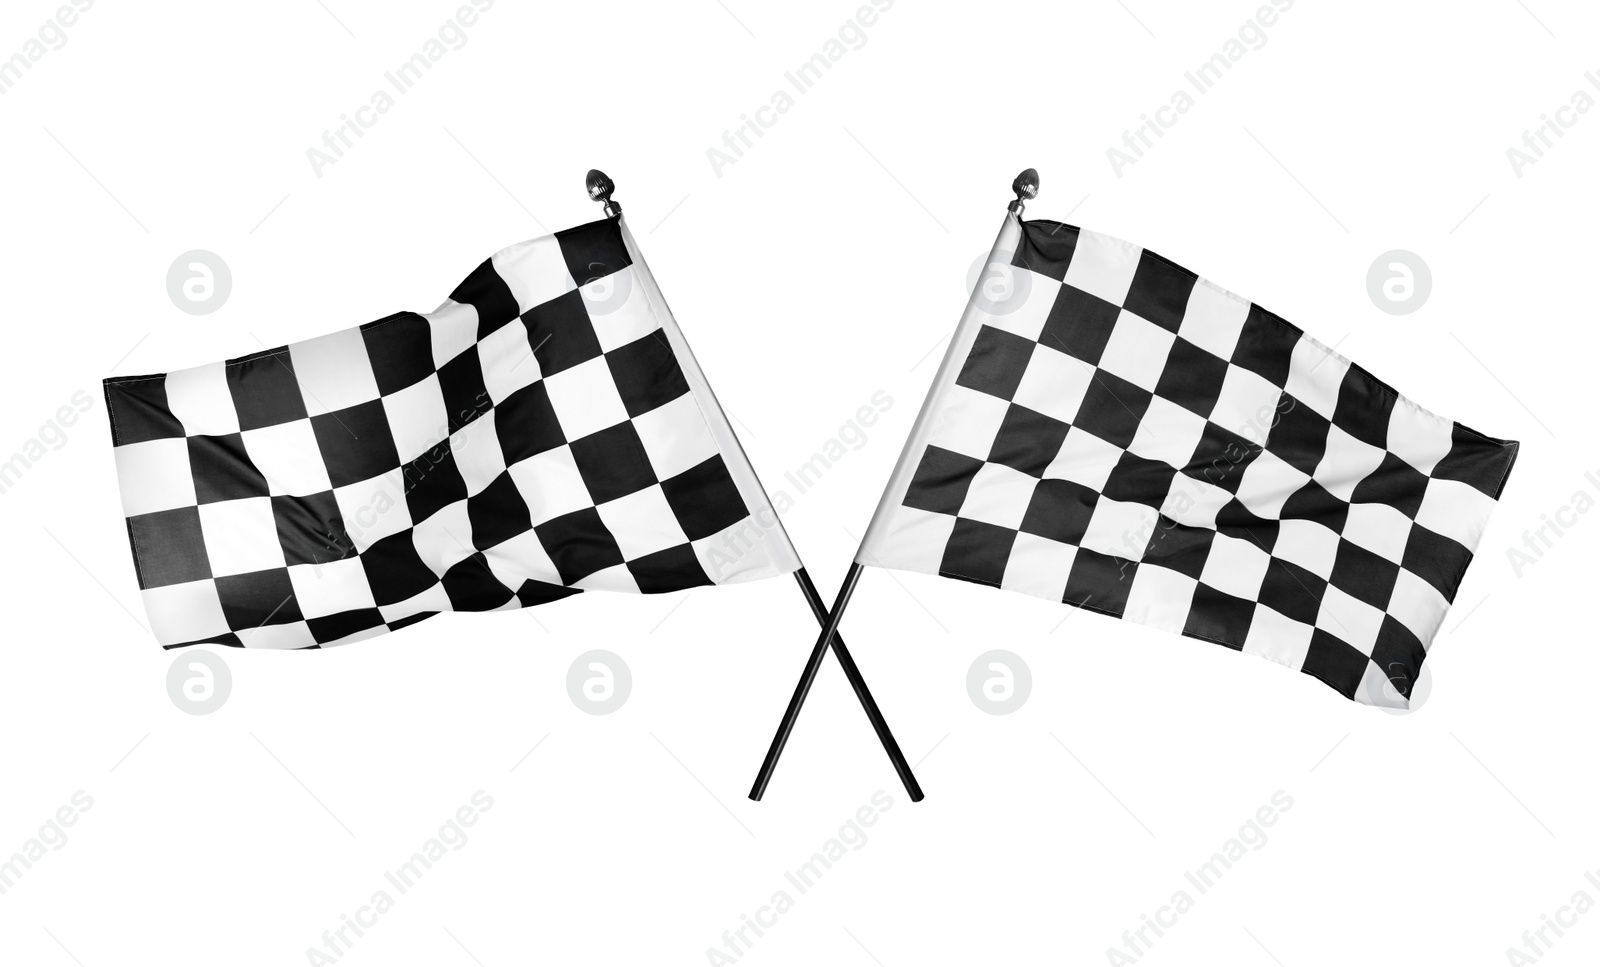 Image of Checkered racing finish flags on white background